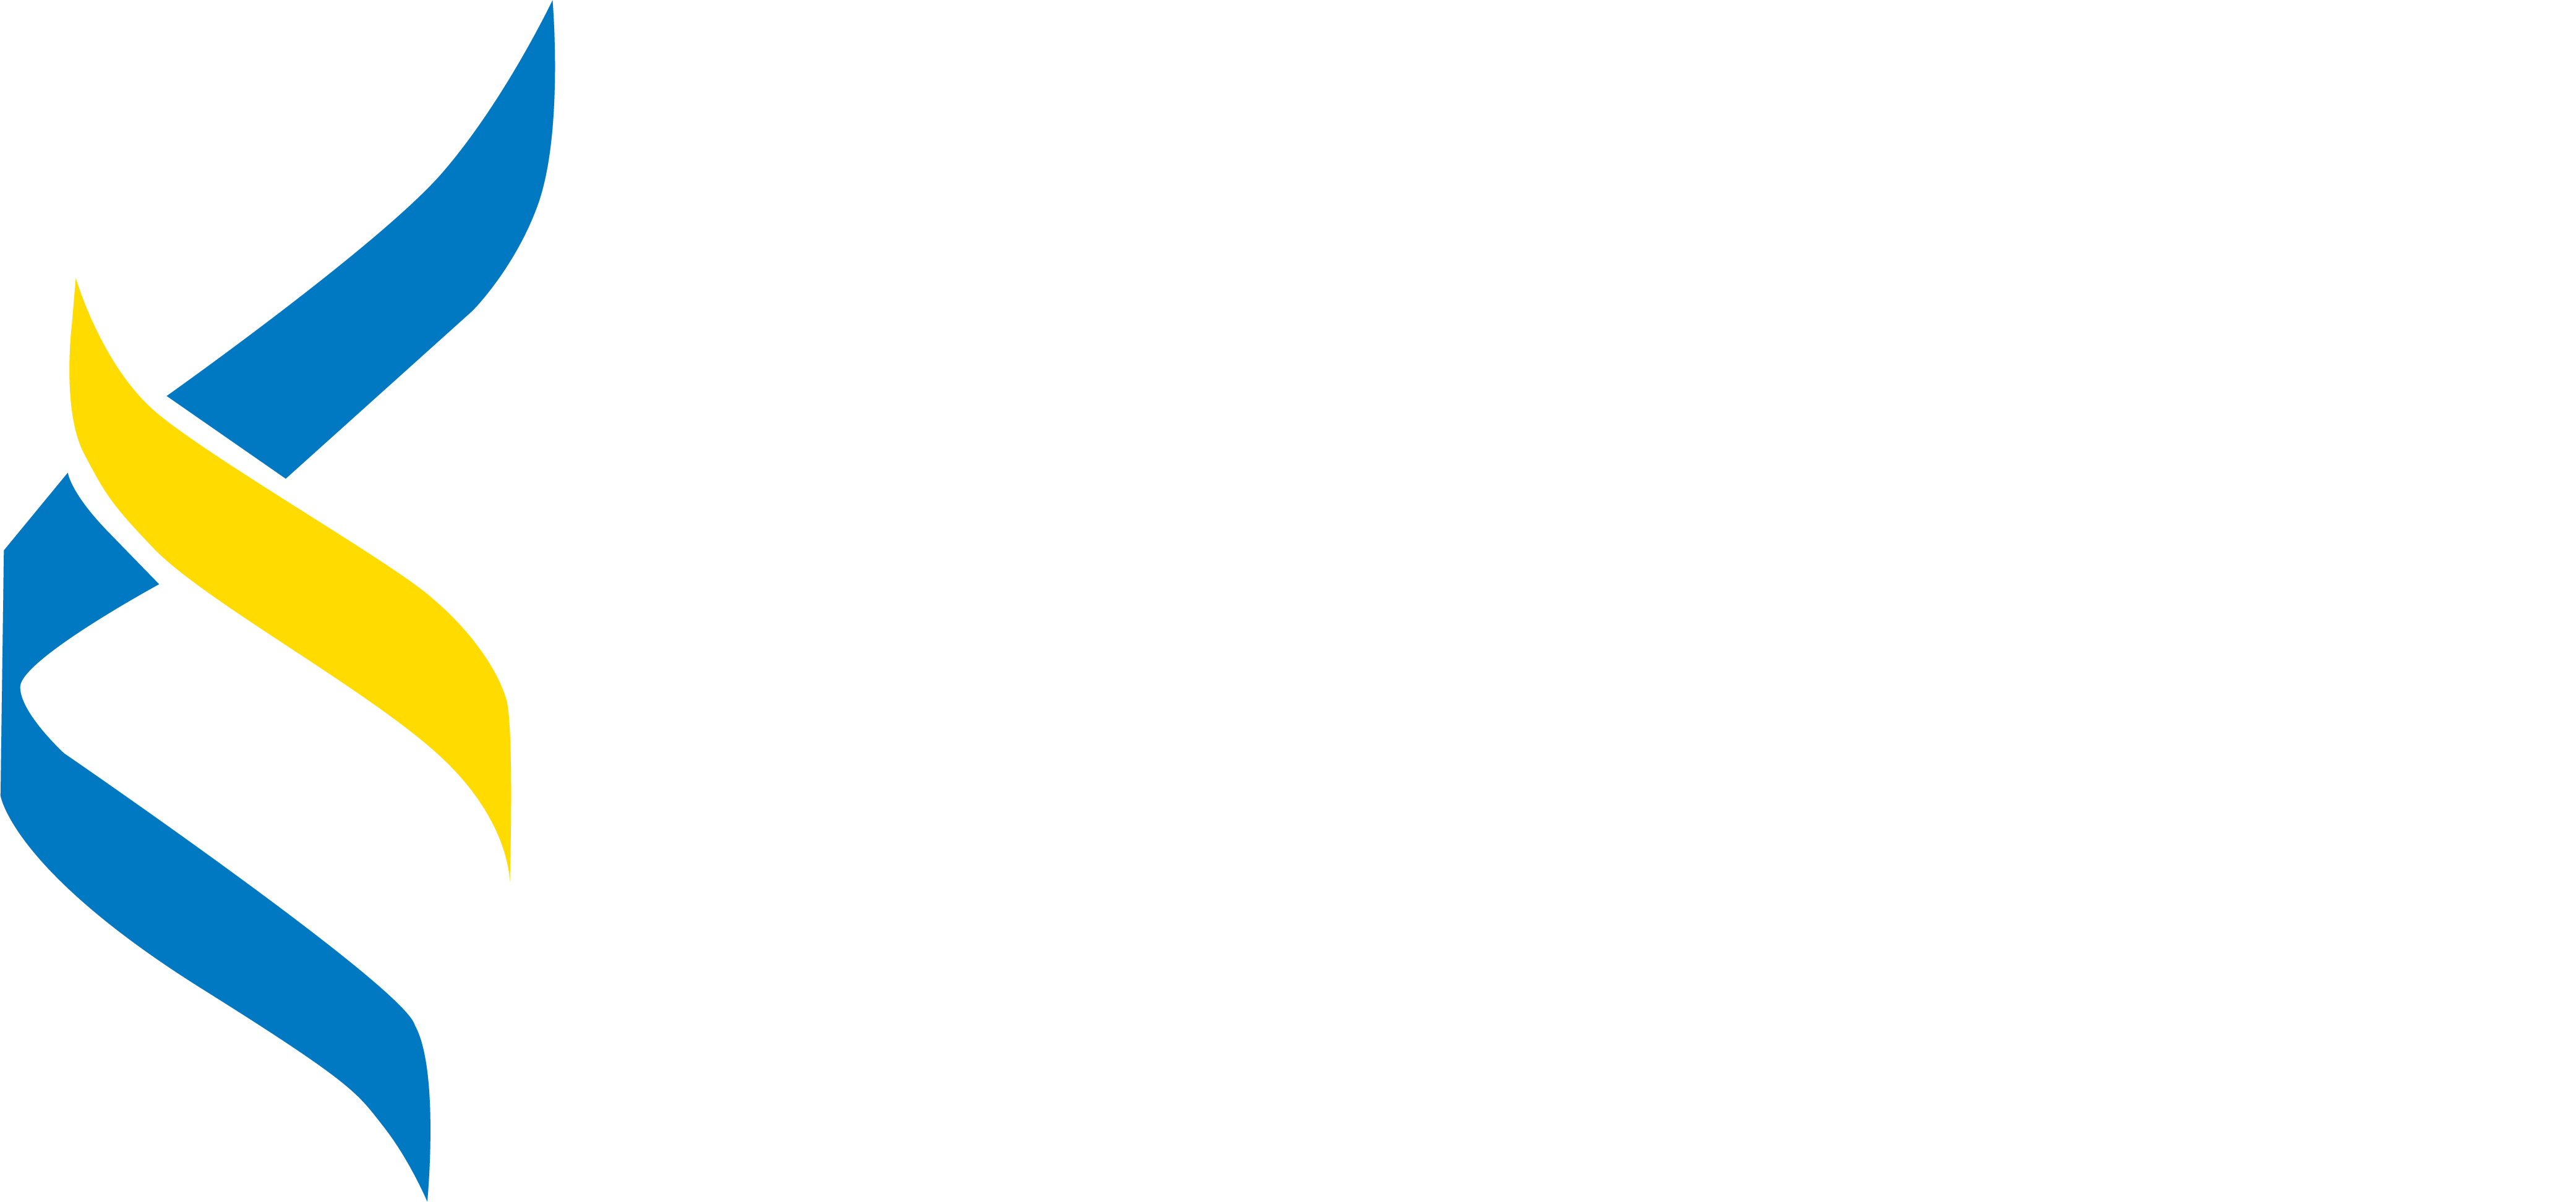 European Health Law and Technology